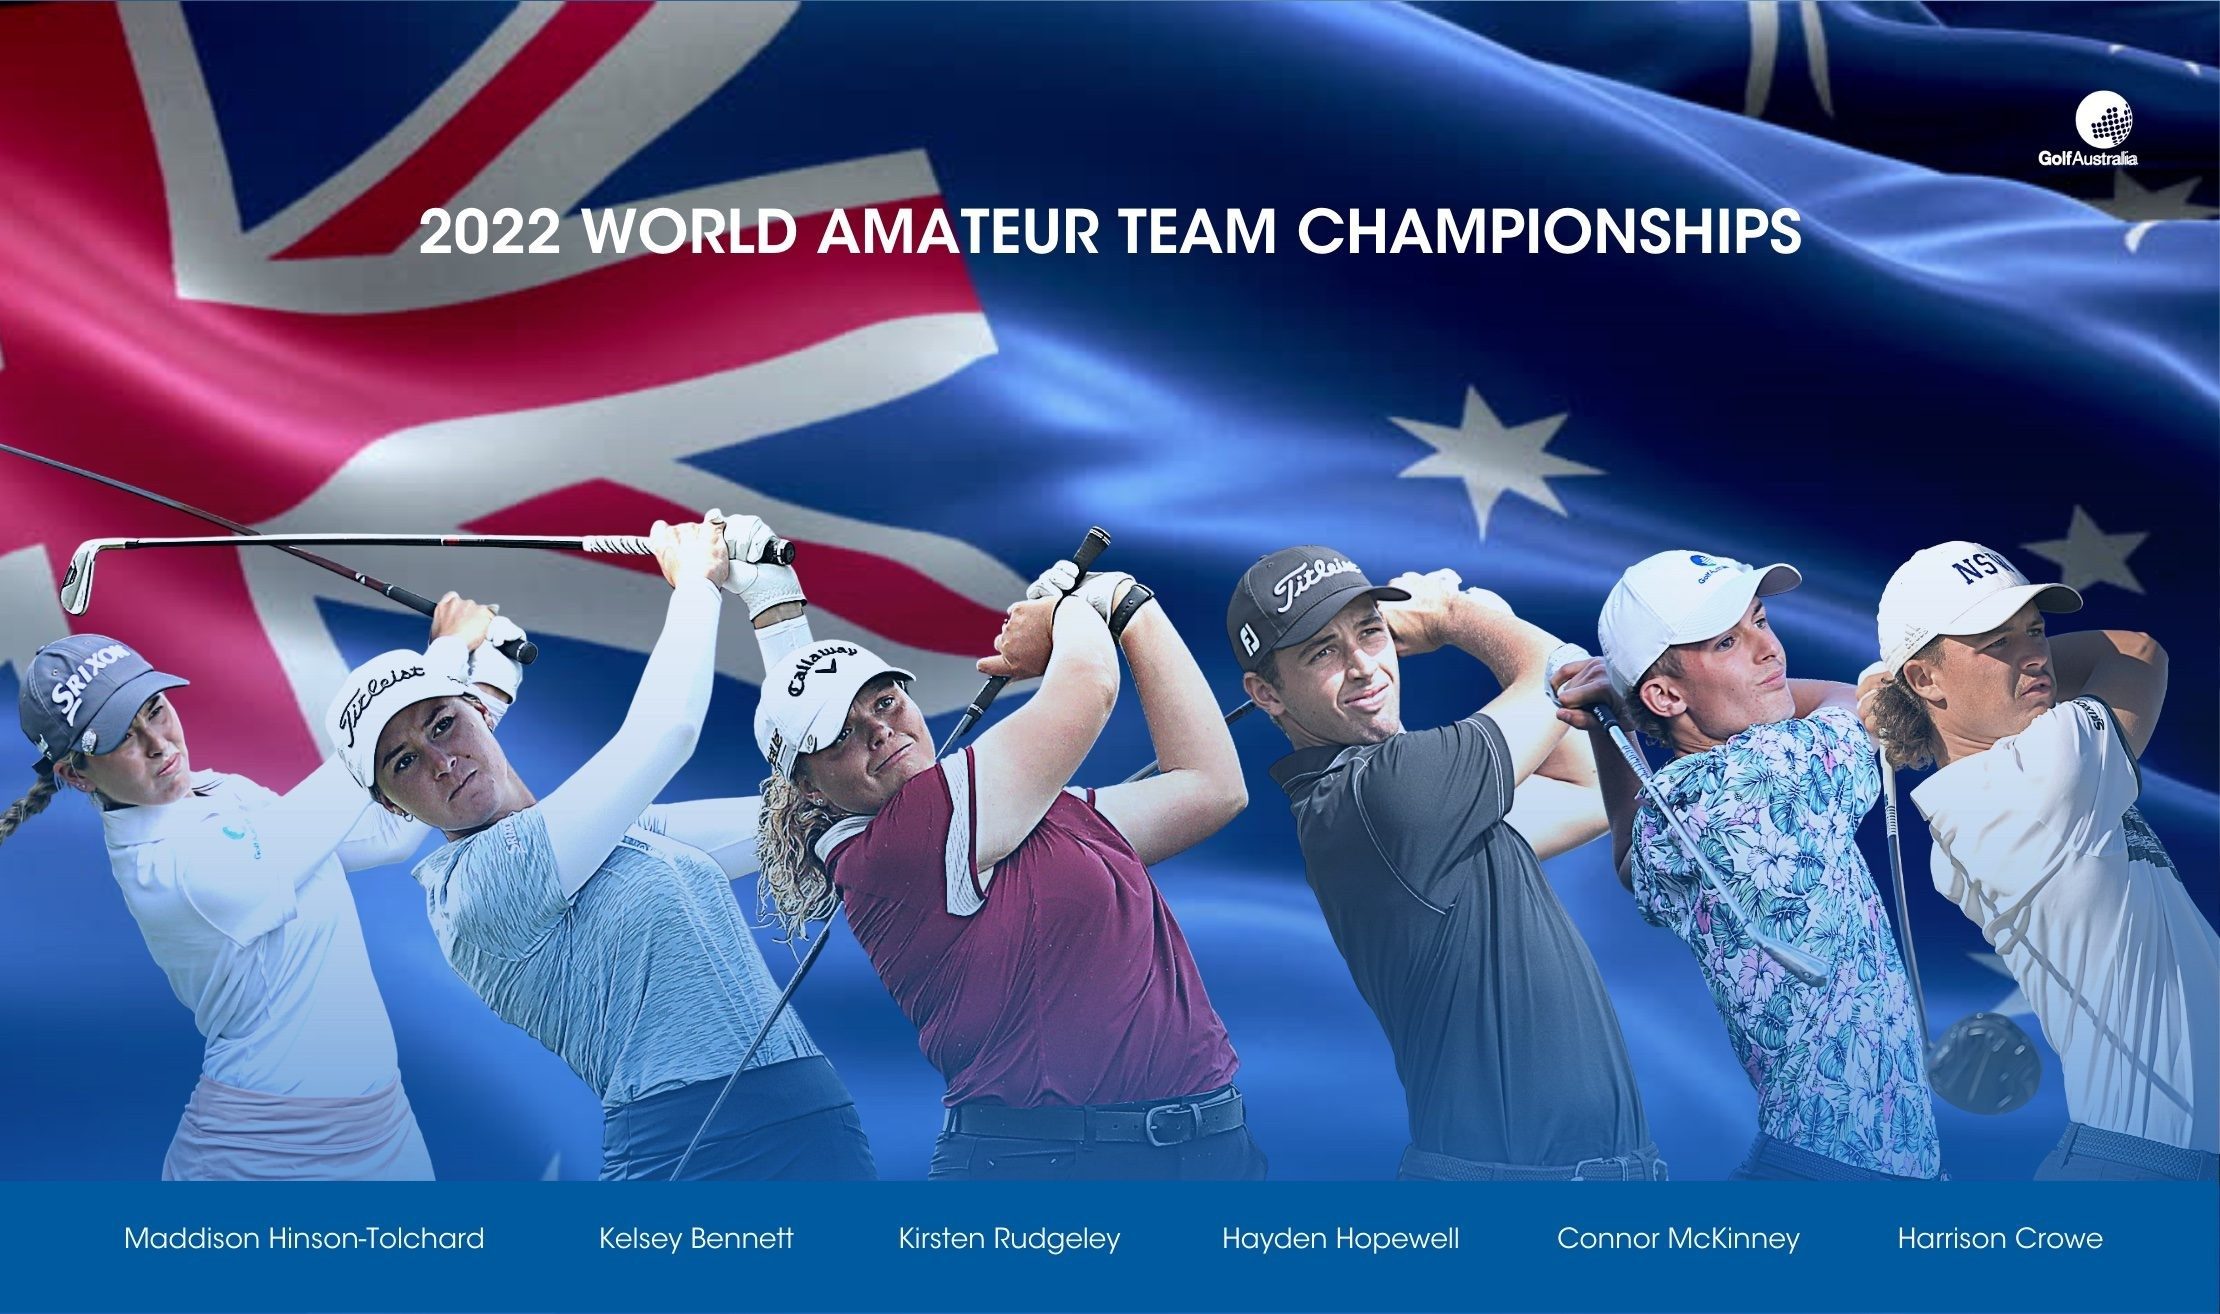 Power-packed teams announced for World Amateur